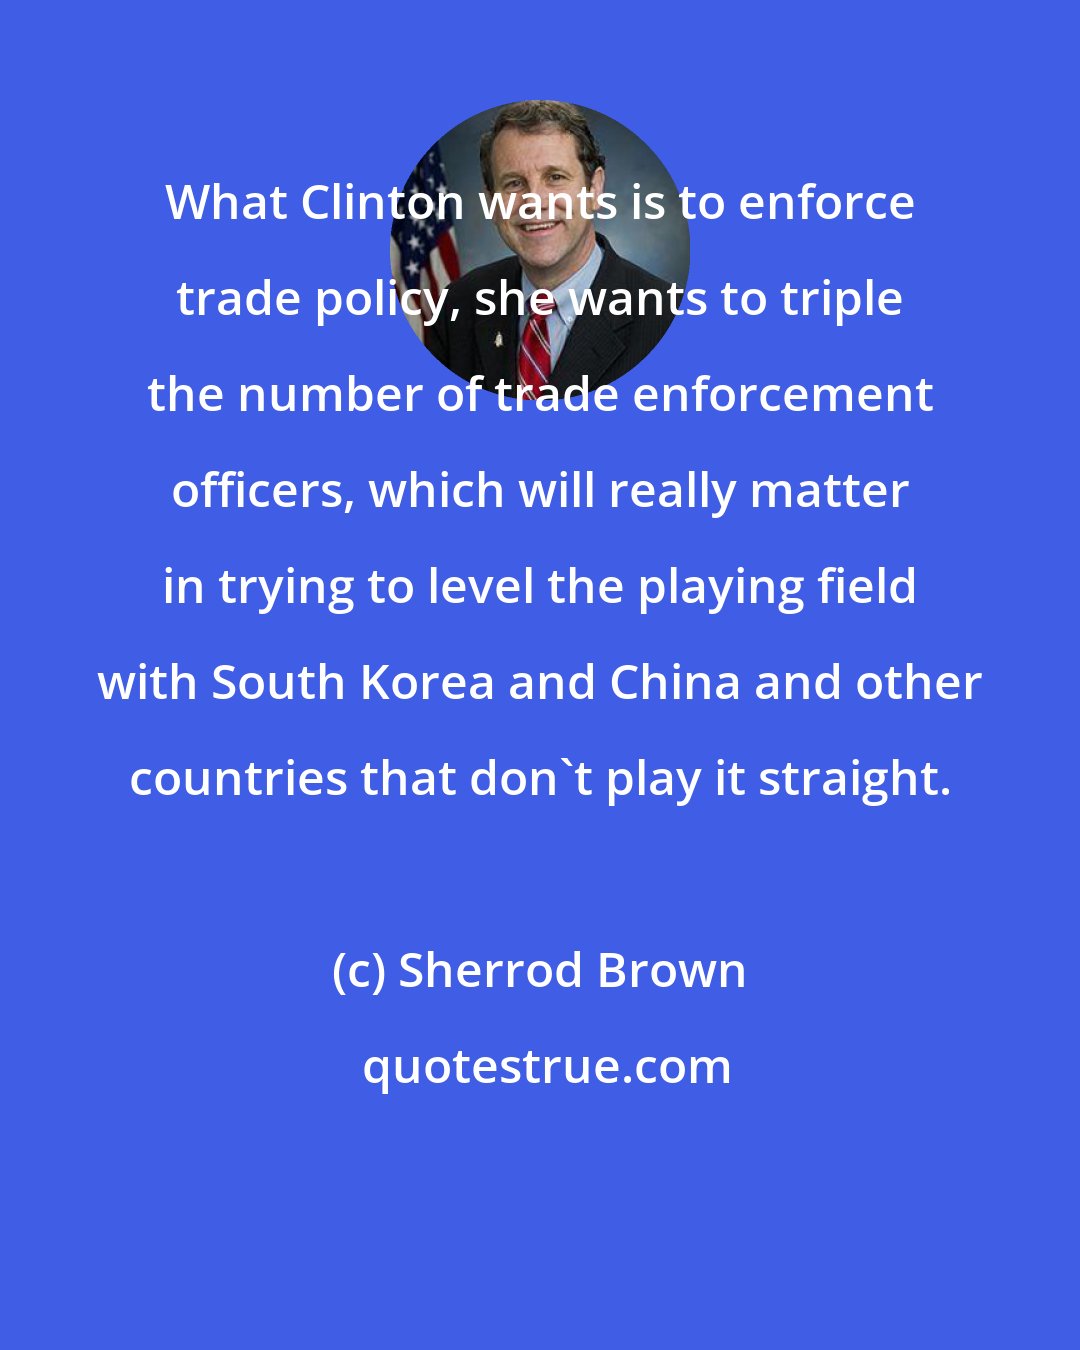 Sherrod Brown: What Clinton wants is to enforce trade policy, she wants to triple the number of trade enforcement officers, which will really matter in trying to level the playing field with South Korea and China and other countries that don't play it straight.